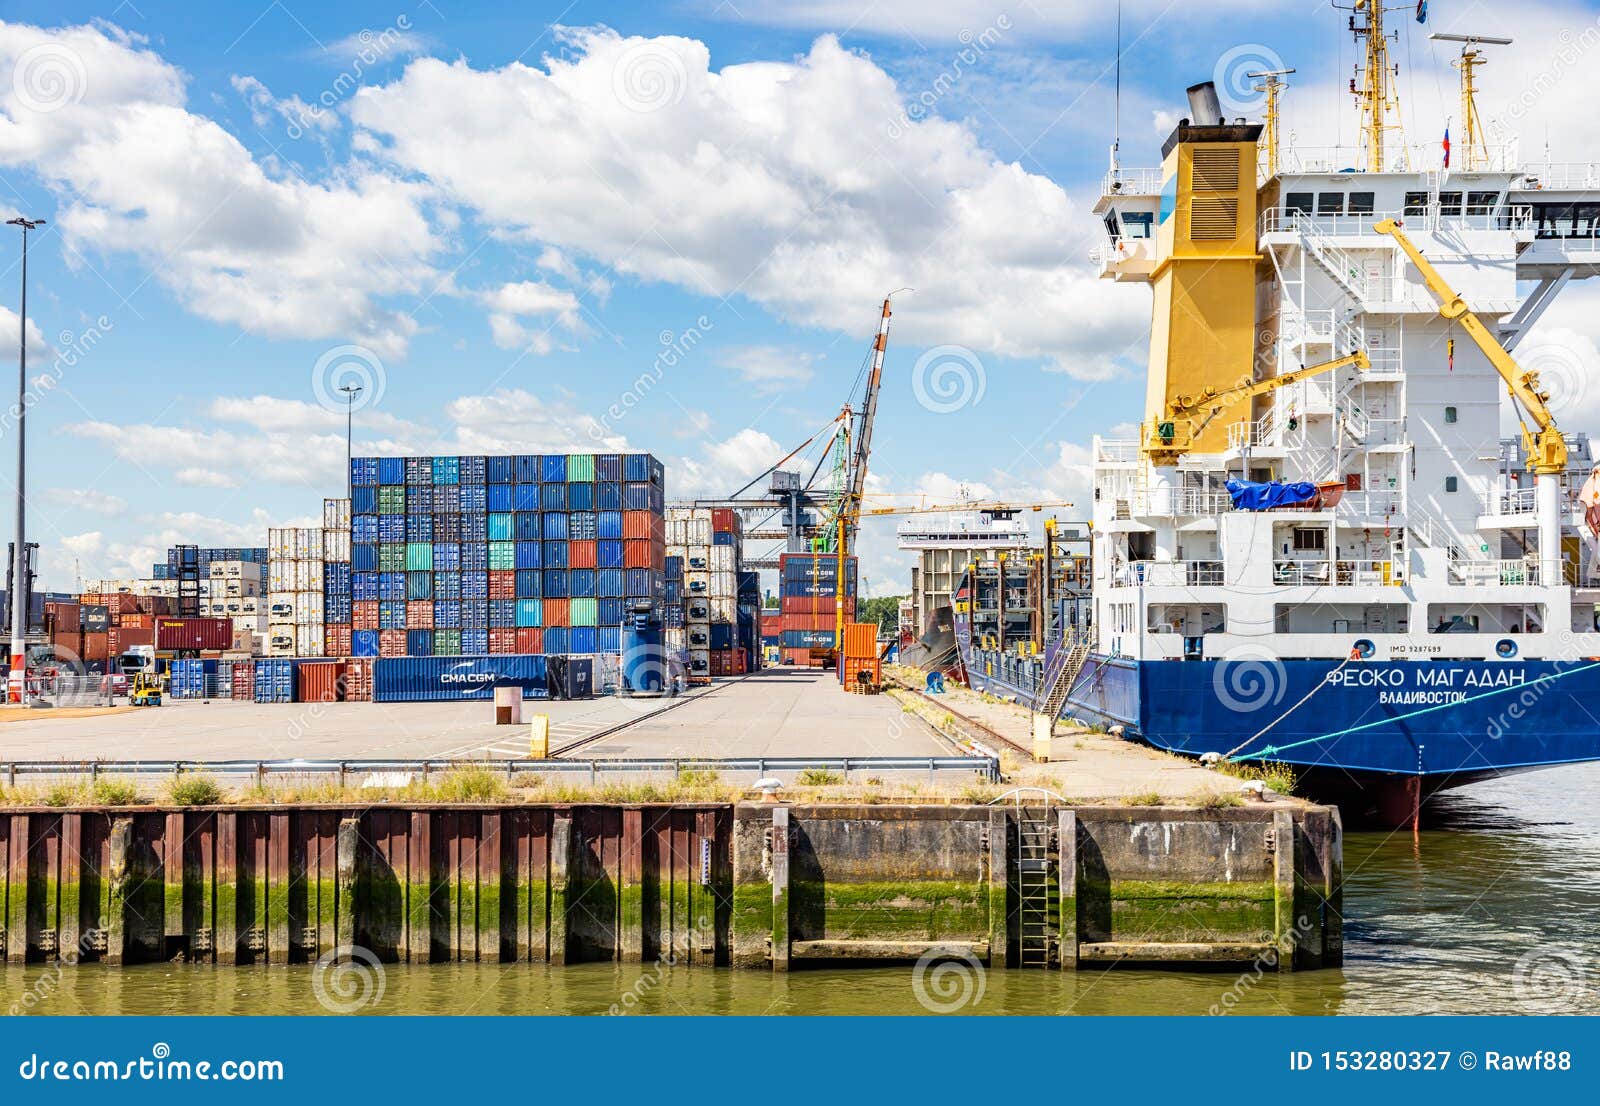 Harbor of Rotterdam, Netherlands. Business, Cargo Loading Unloading Editorial Photography of logistics, freight: